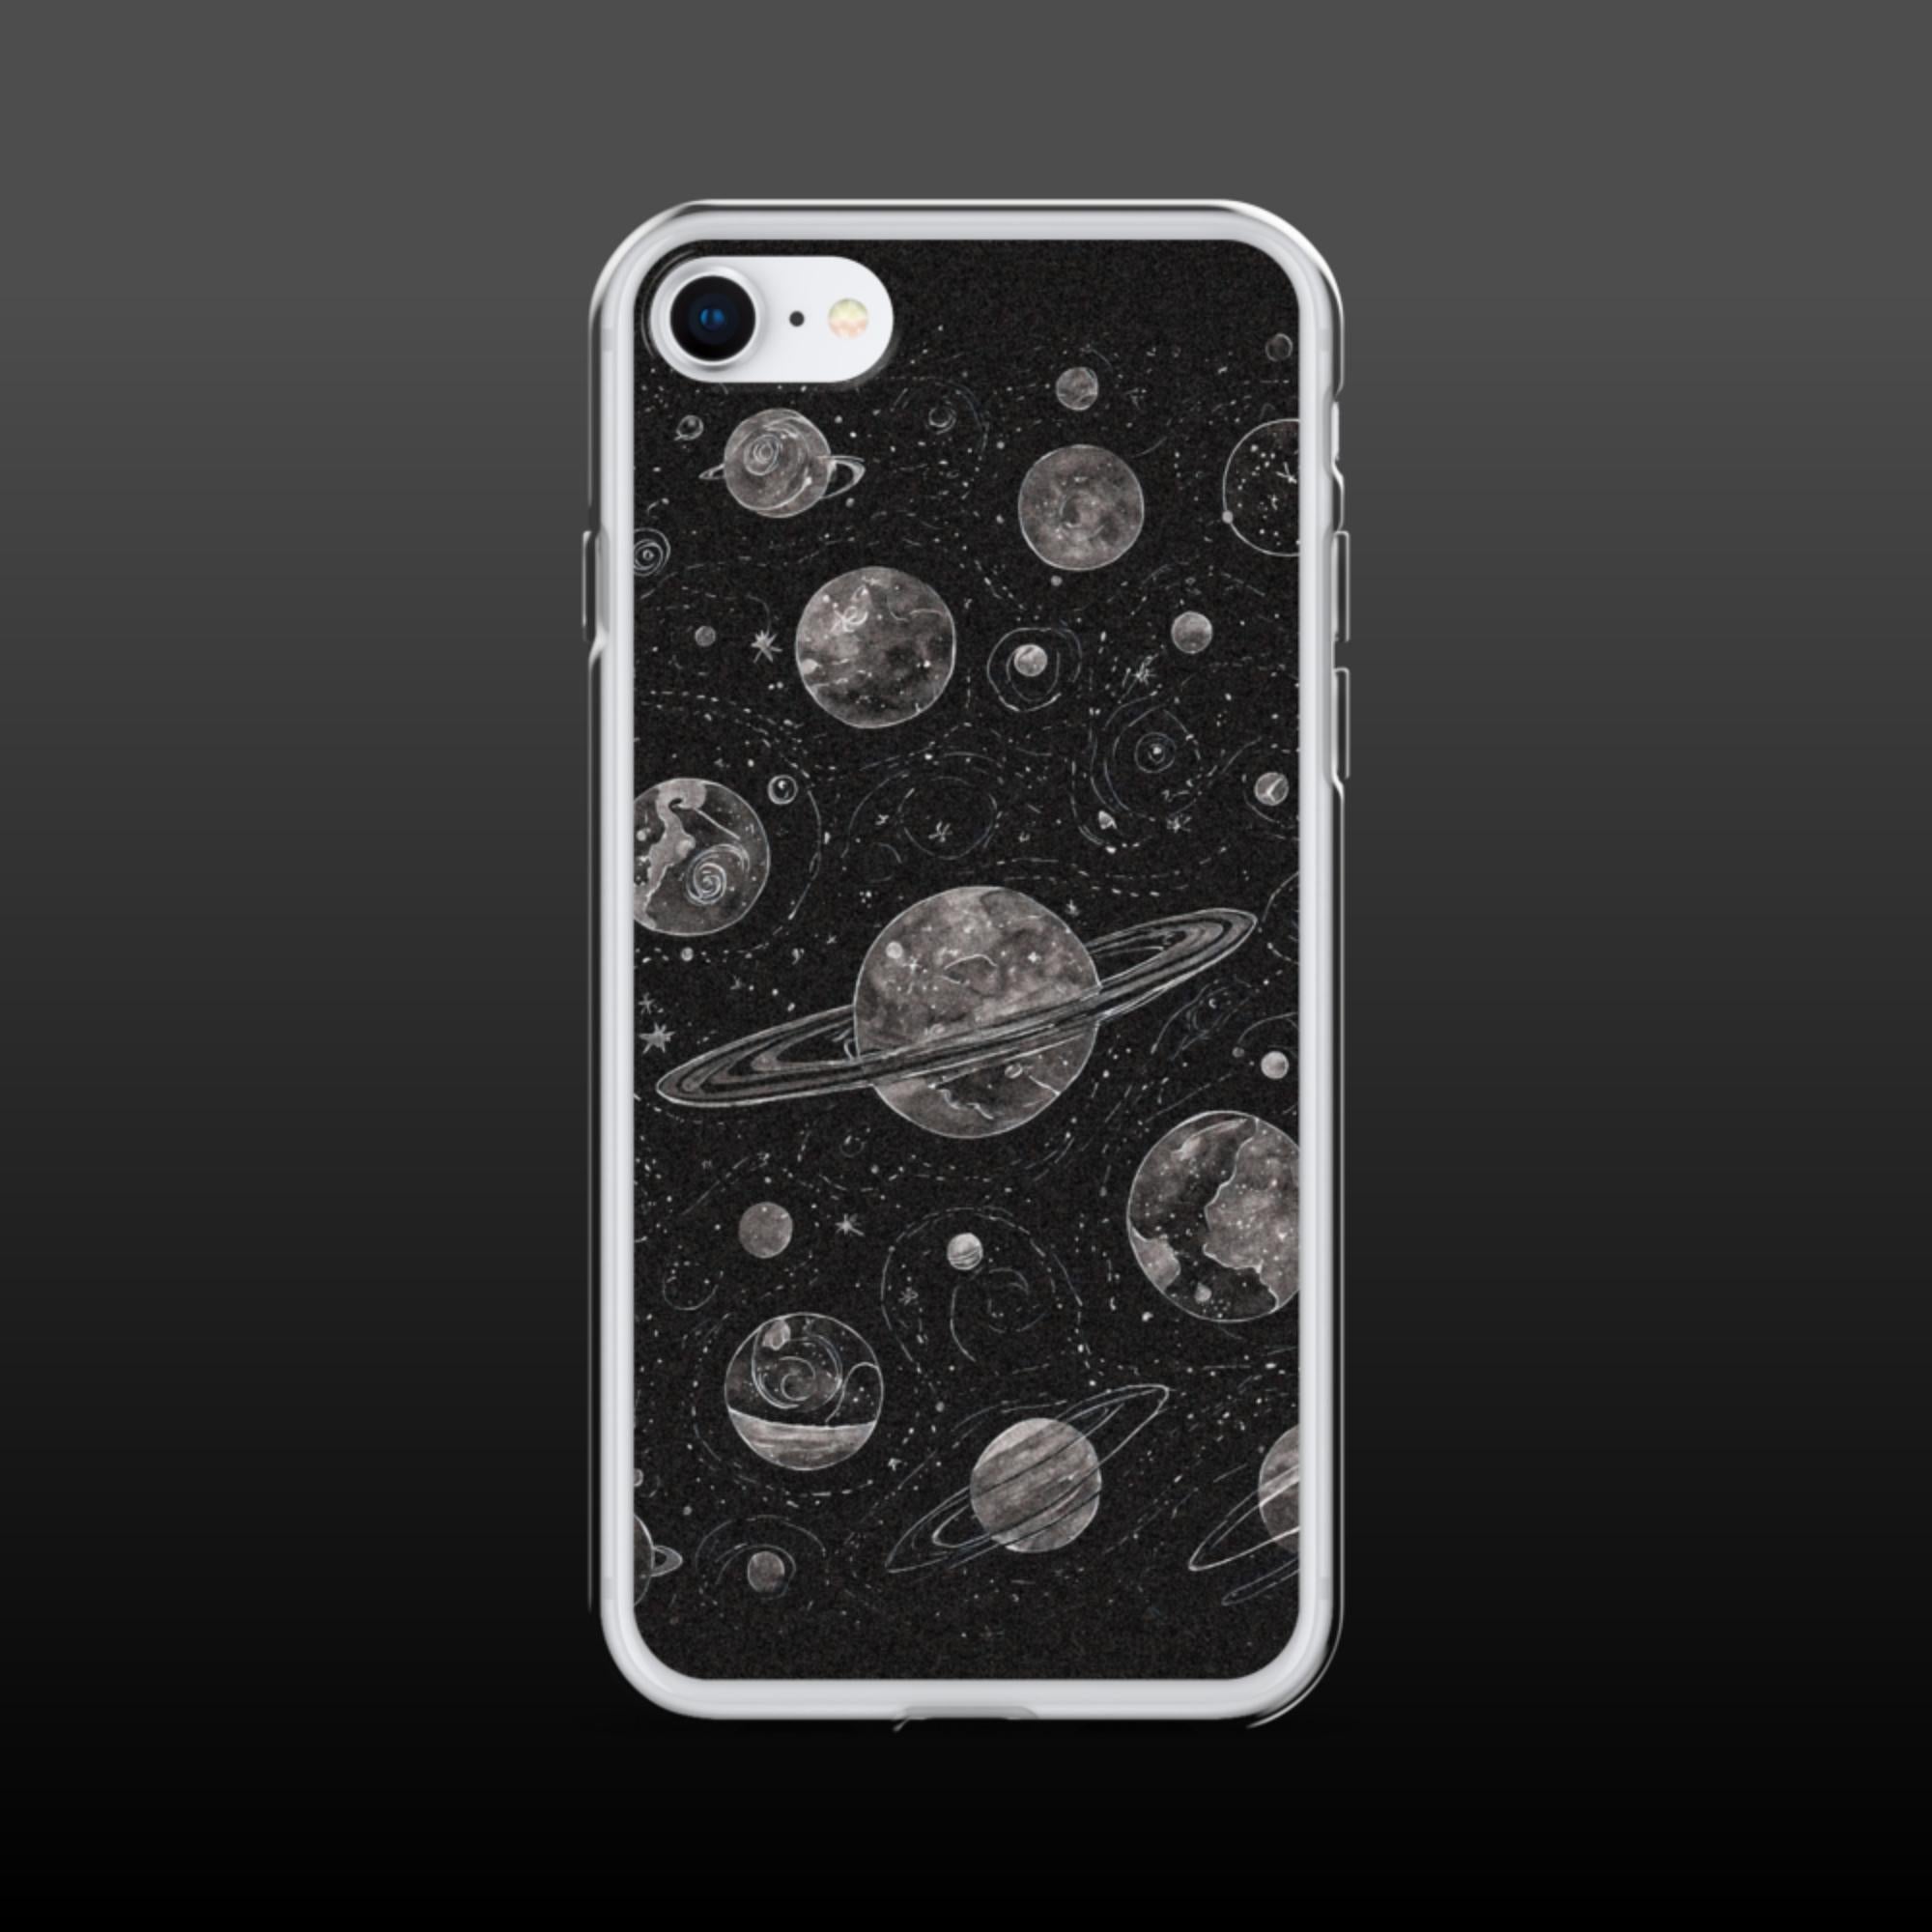 "Map of the universe" clear iphone case - Clear iphone case - Ever colorful